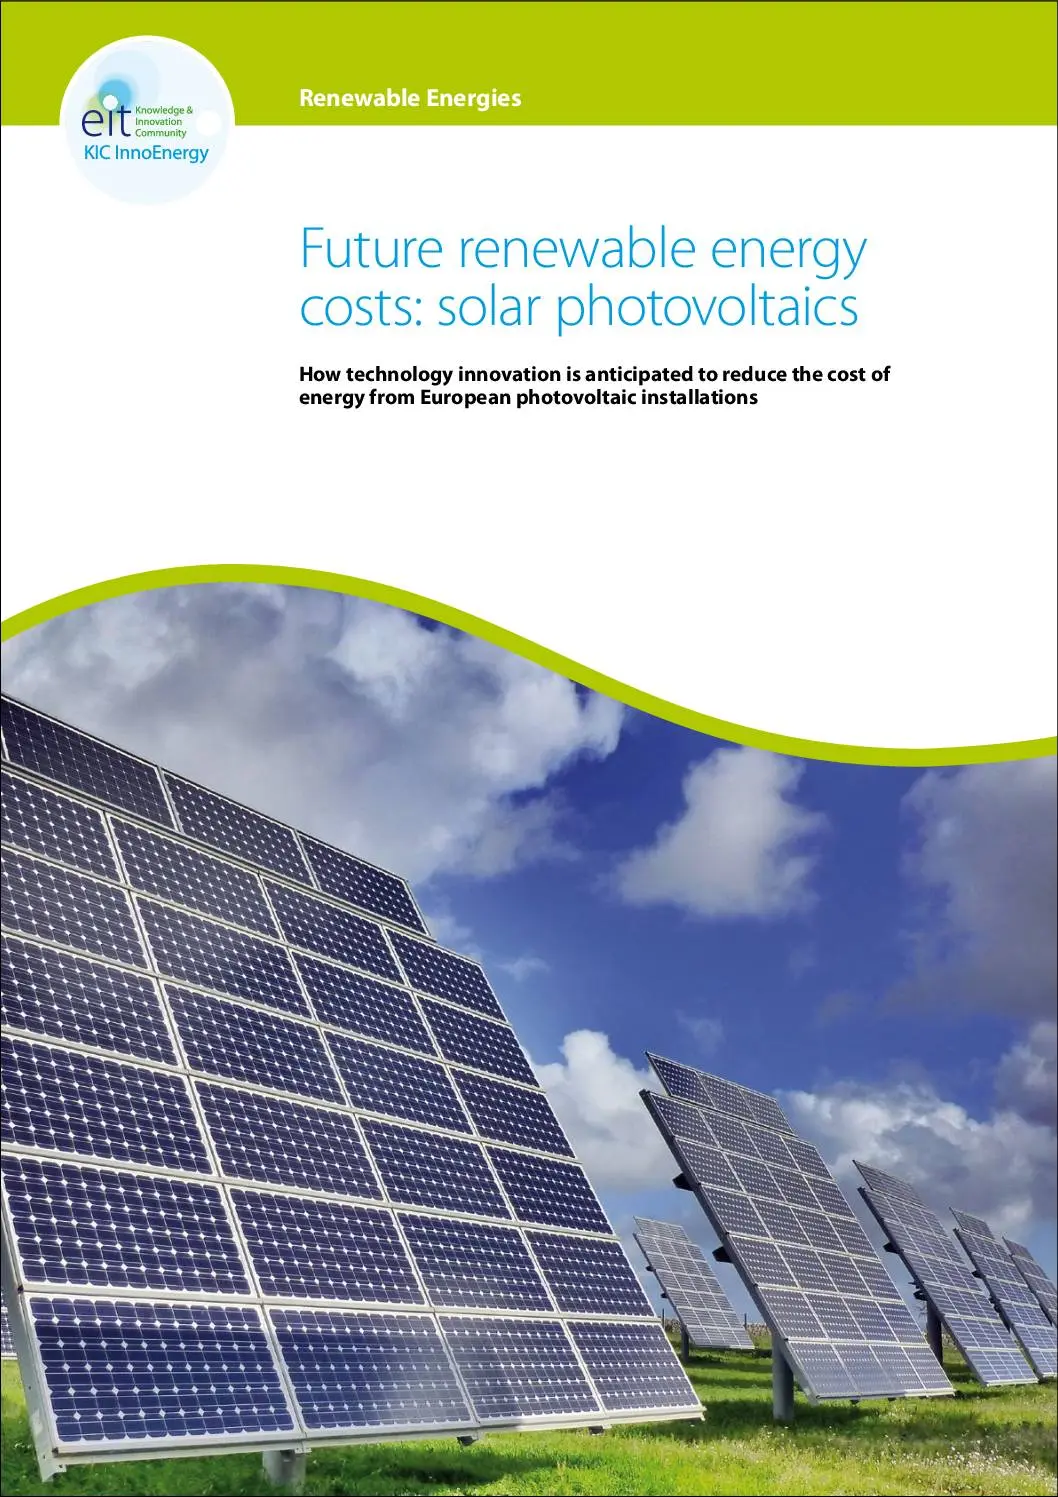 future renewable energies costs solar photovoltaics kic innoenergy - How much will the green energy transition cost